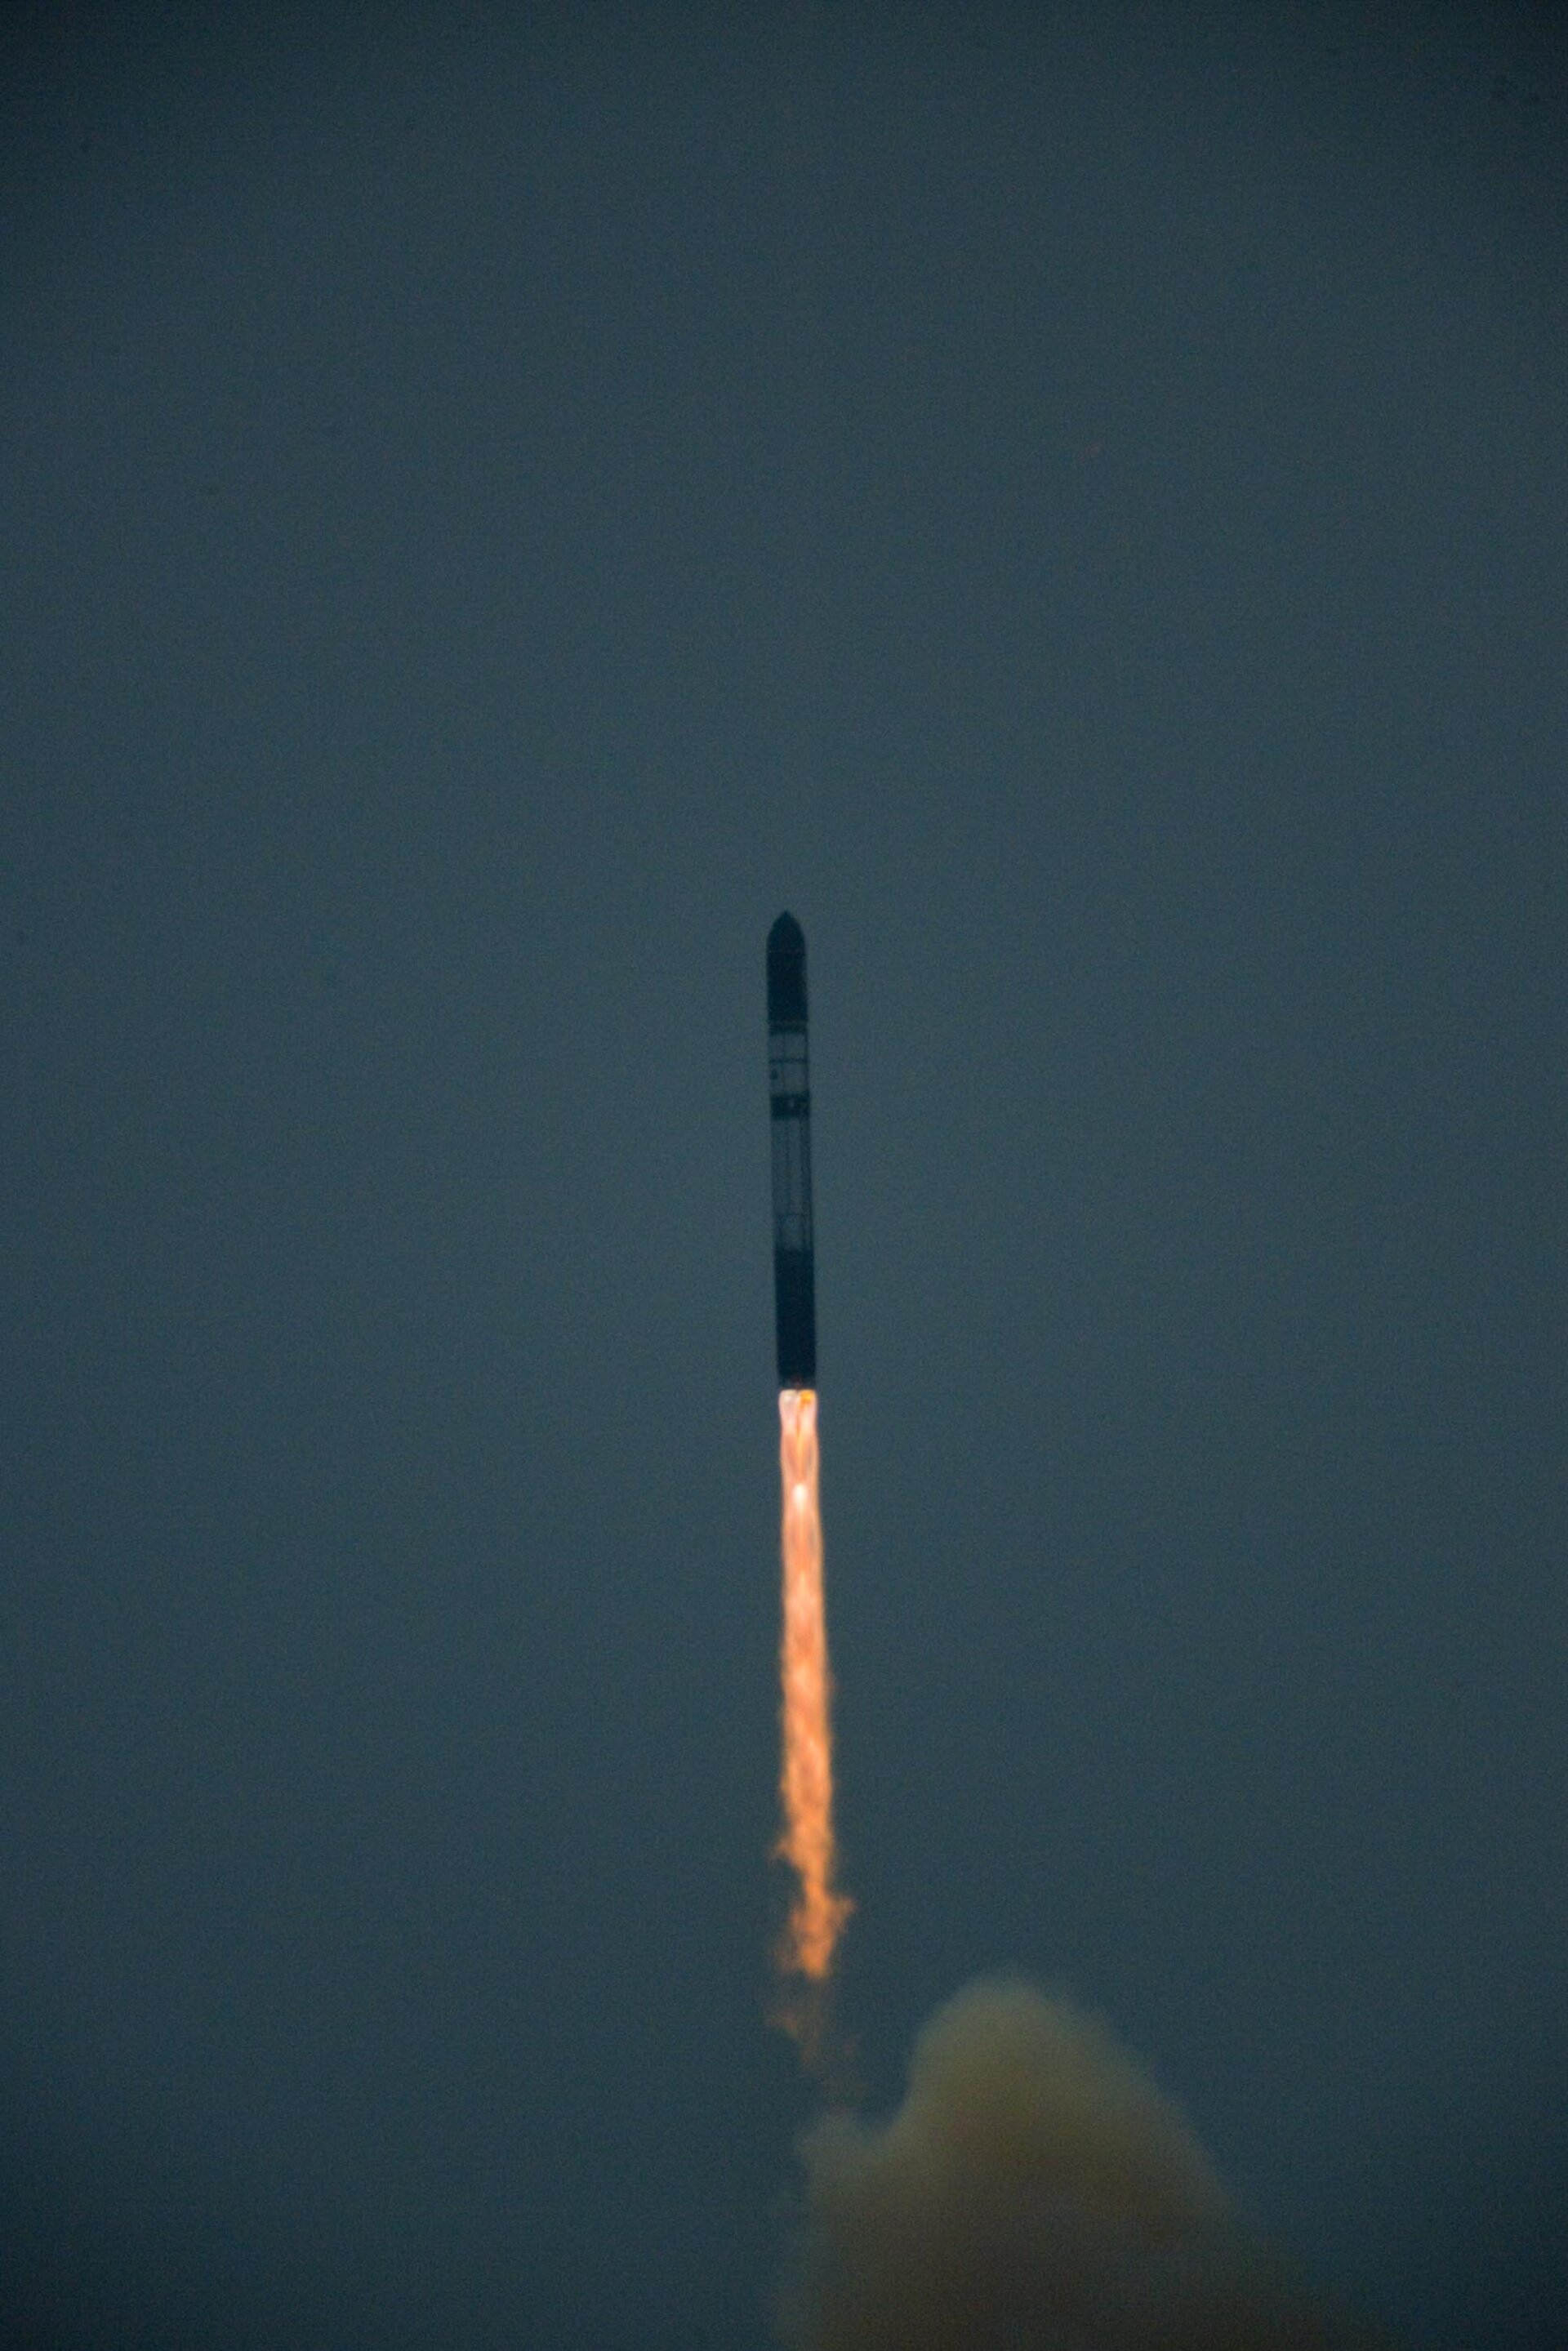 Successful launch for ESA’s CryoSat-2 ice mission